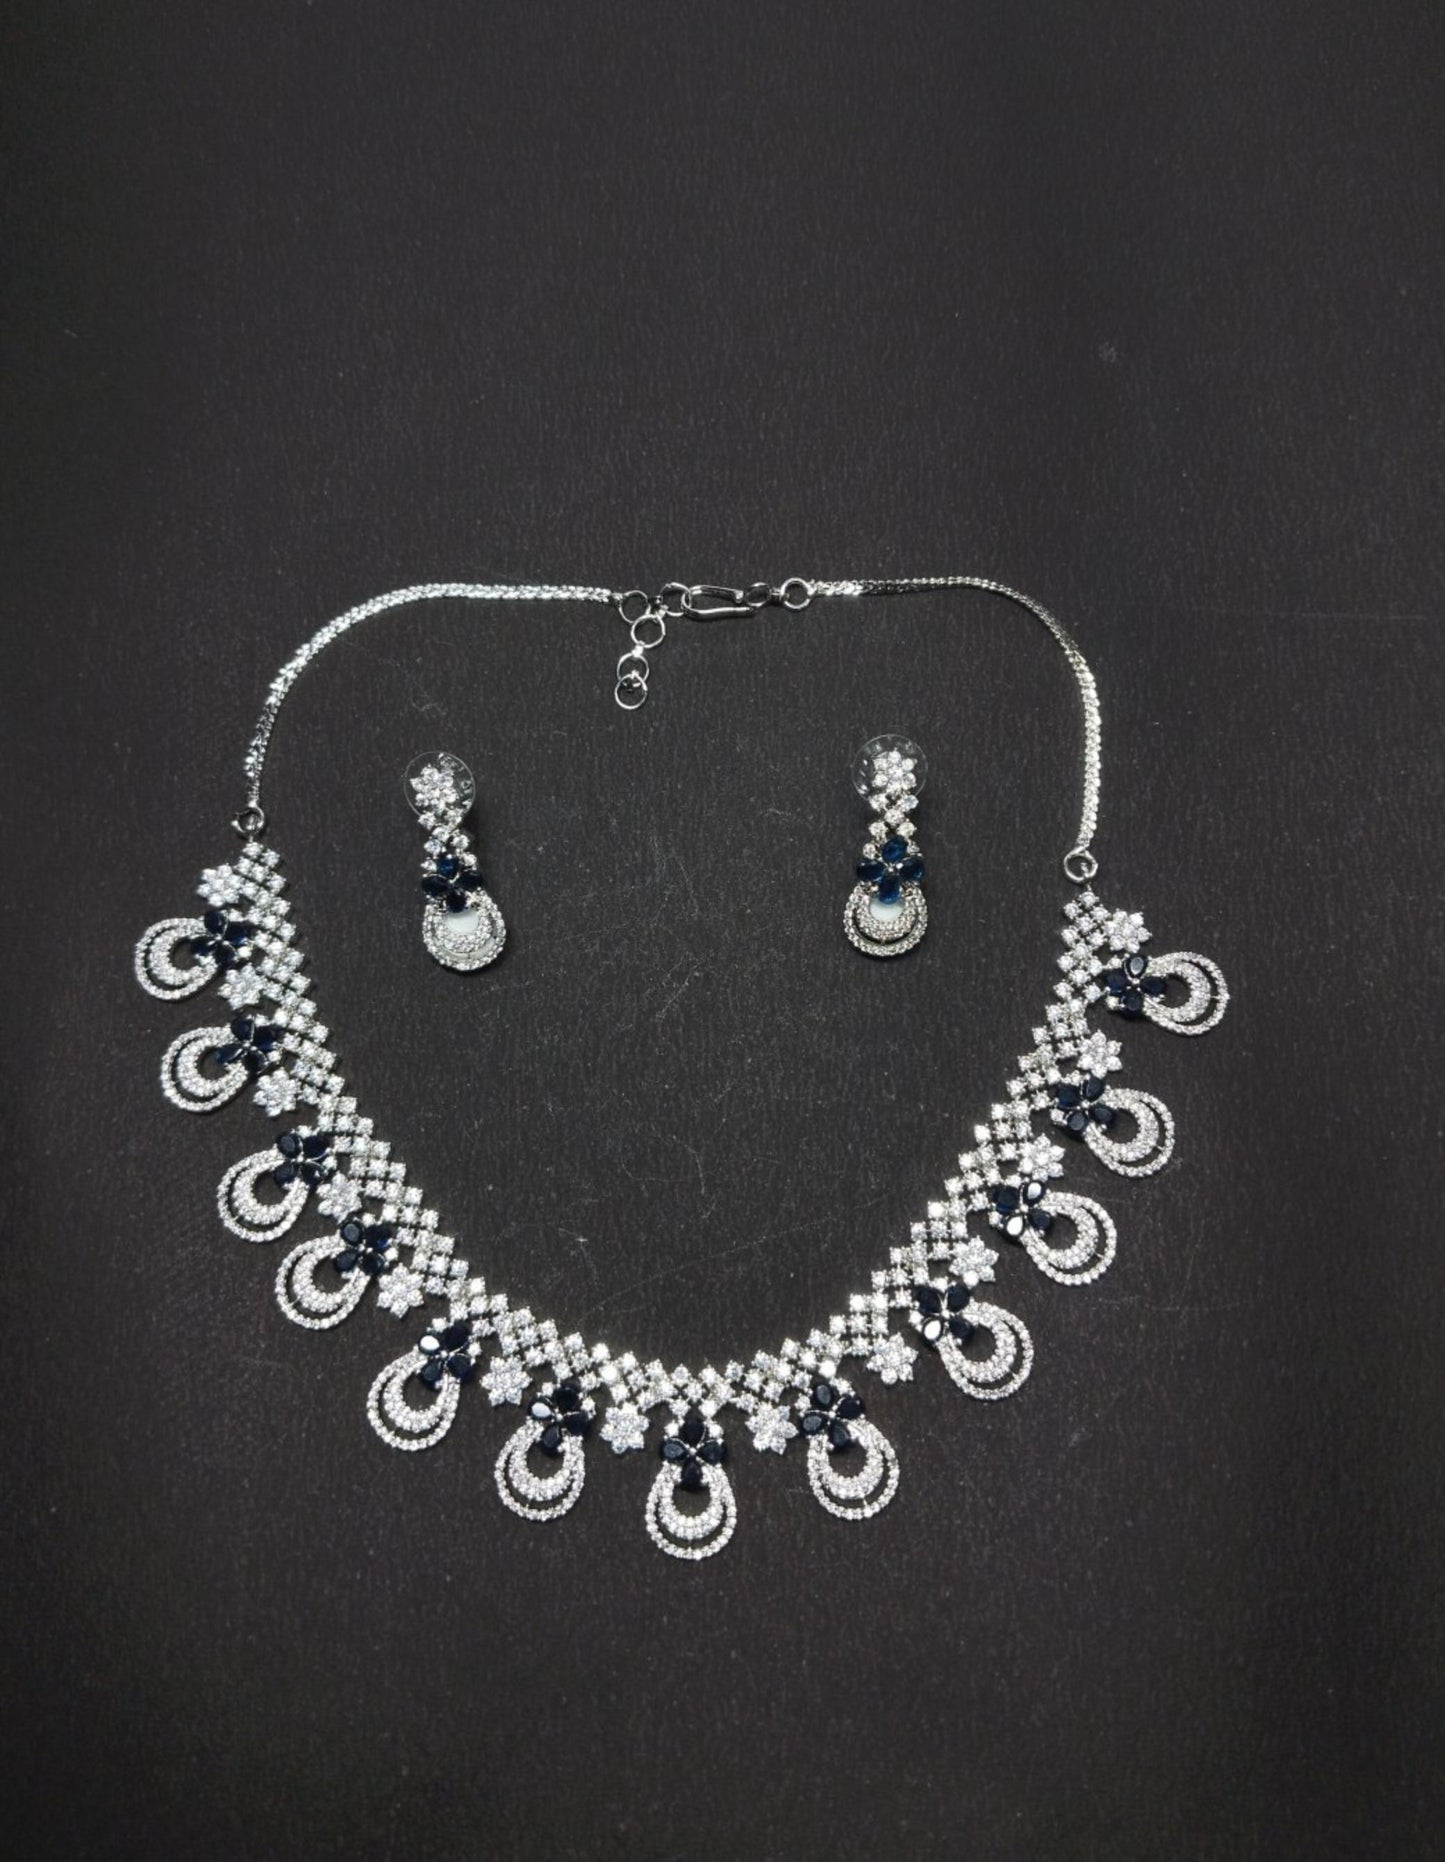 Rhodium-Plated American Diamond Stone-Studded Necklace Set with Earrings